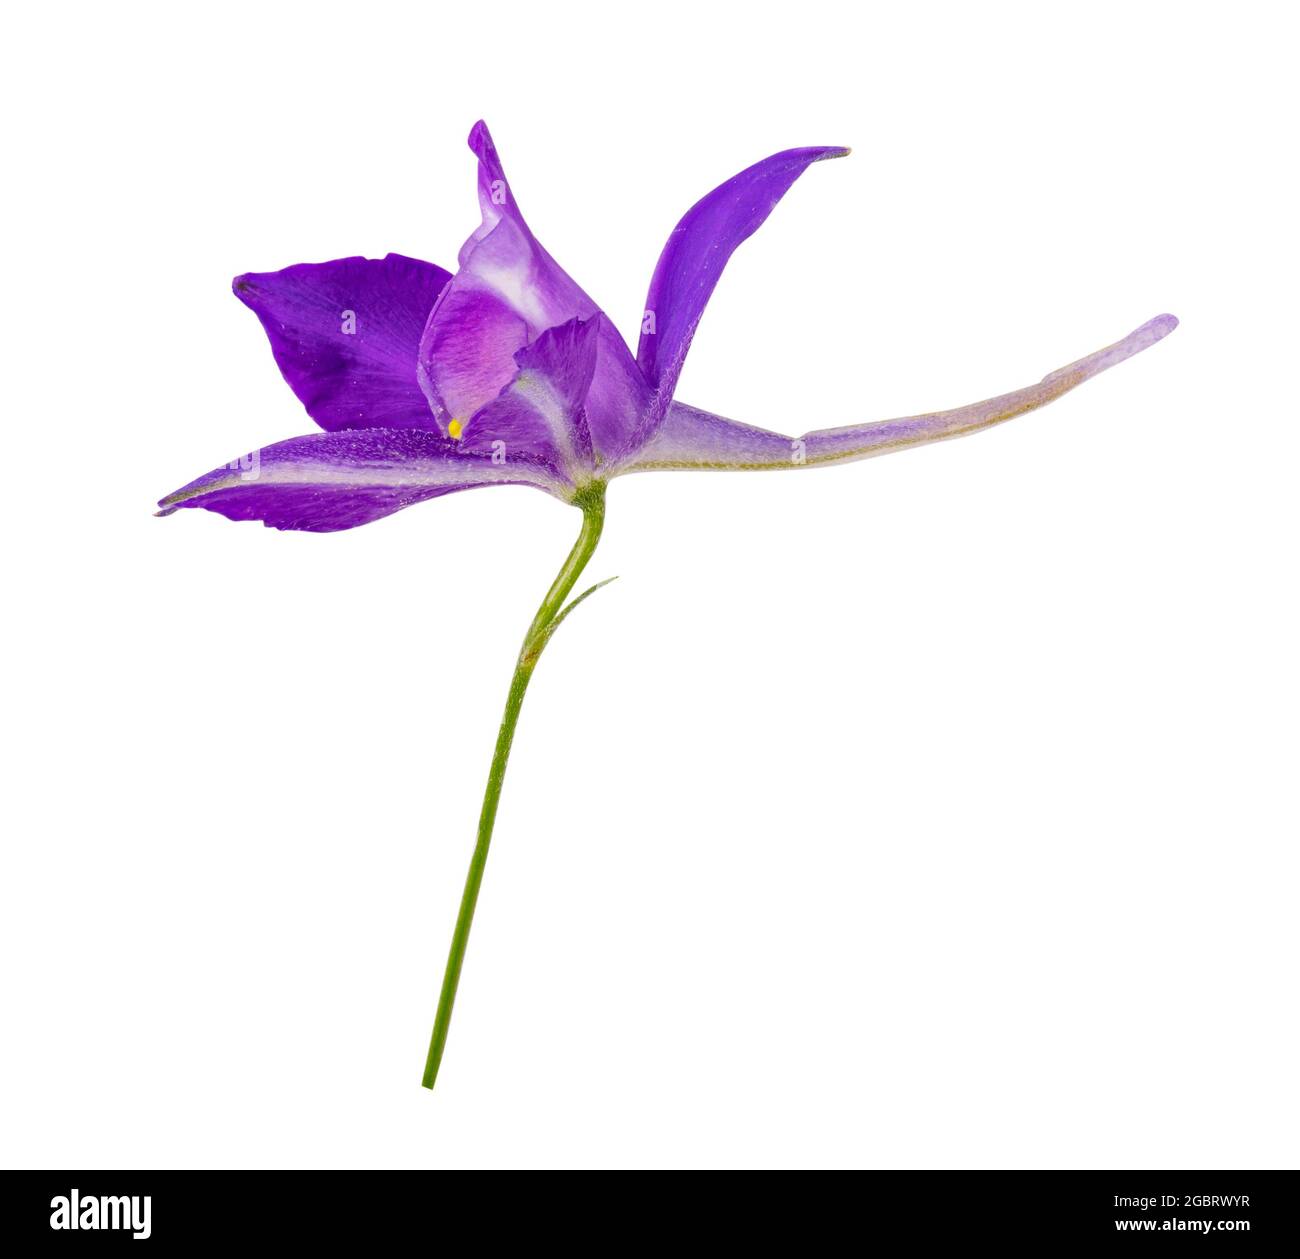 Consolida regalis. Blue wild flower. Clipping path Stock Photo